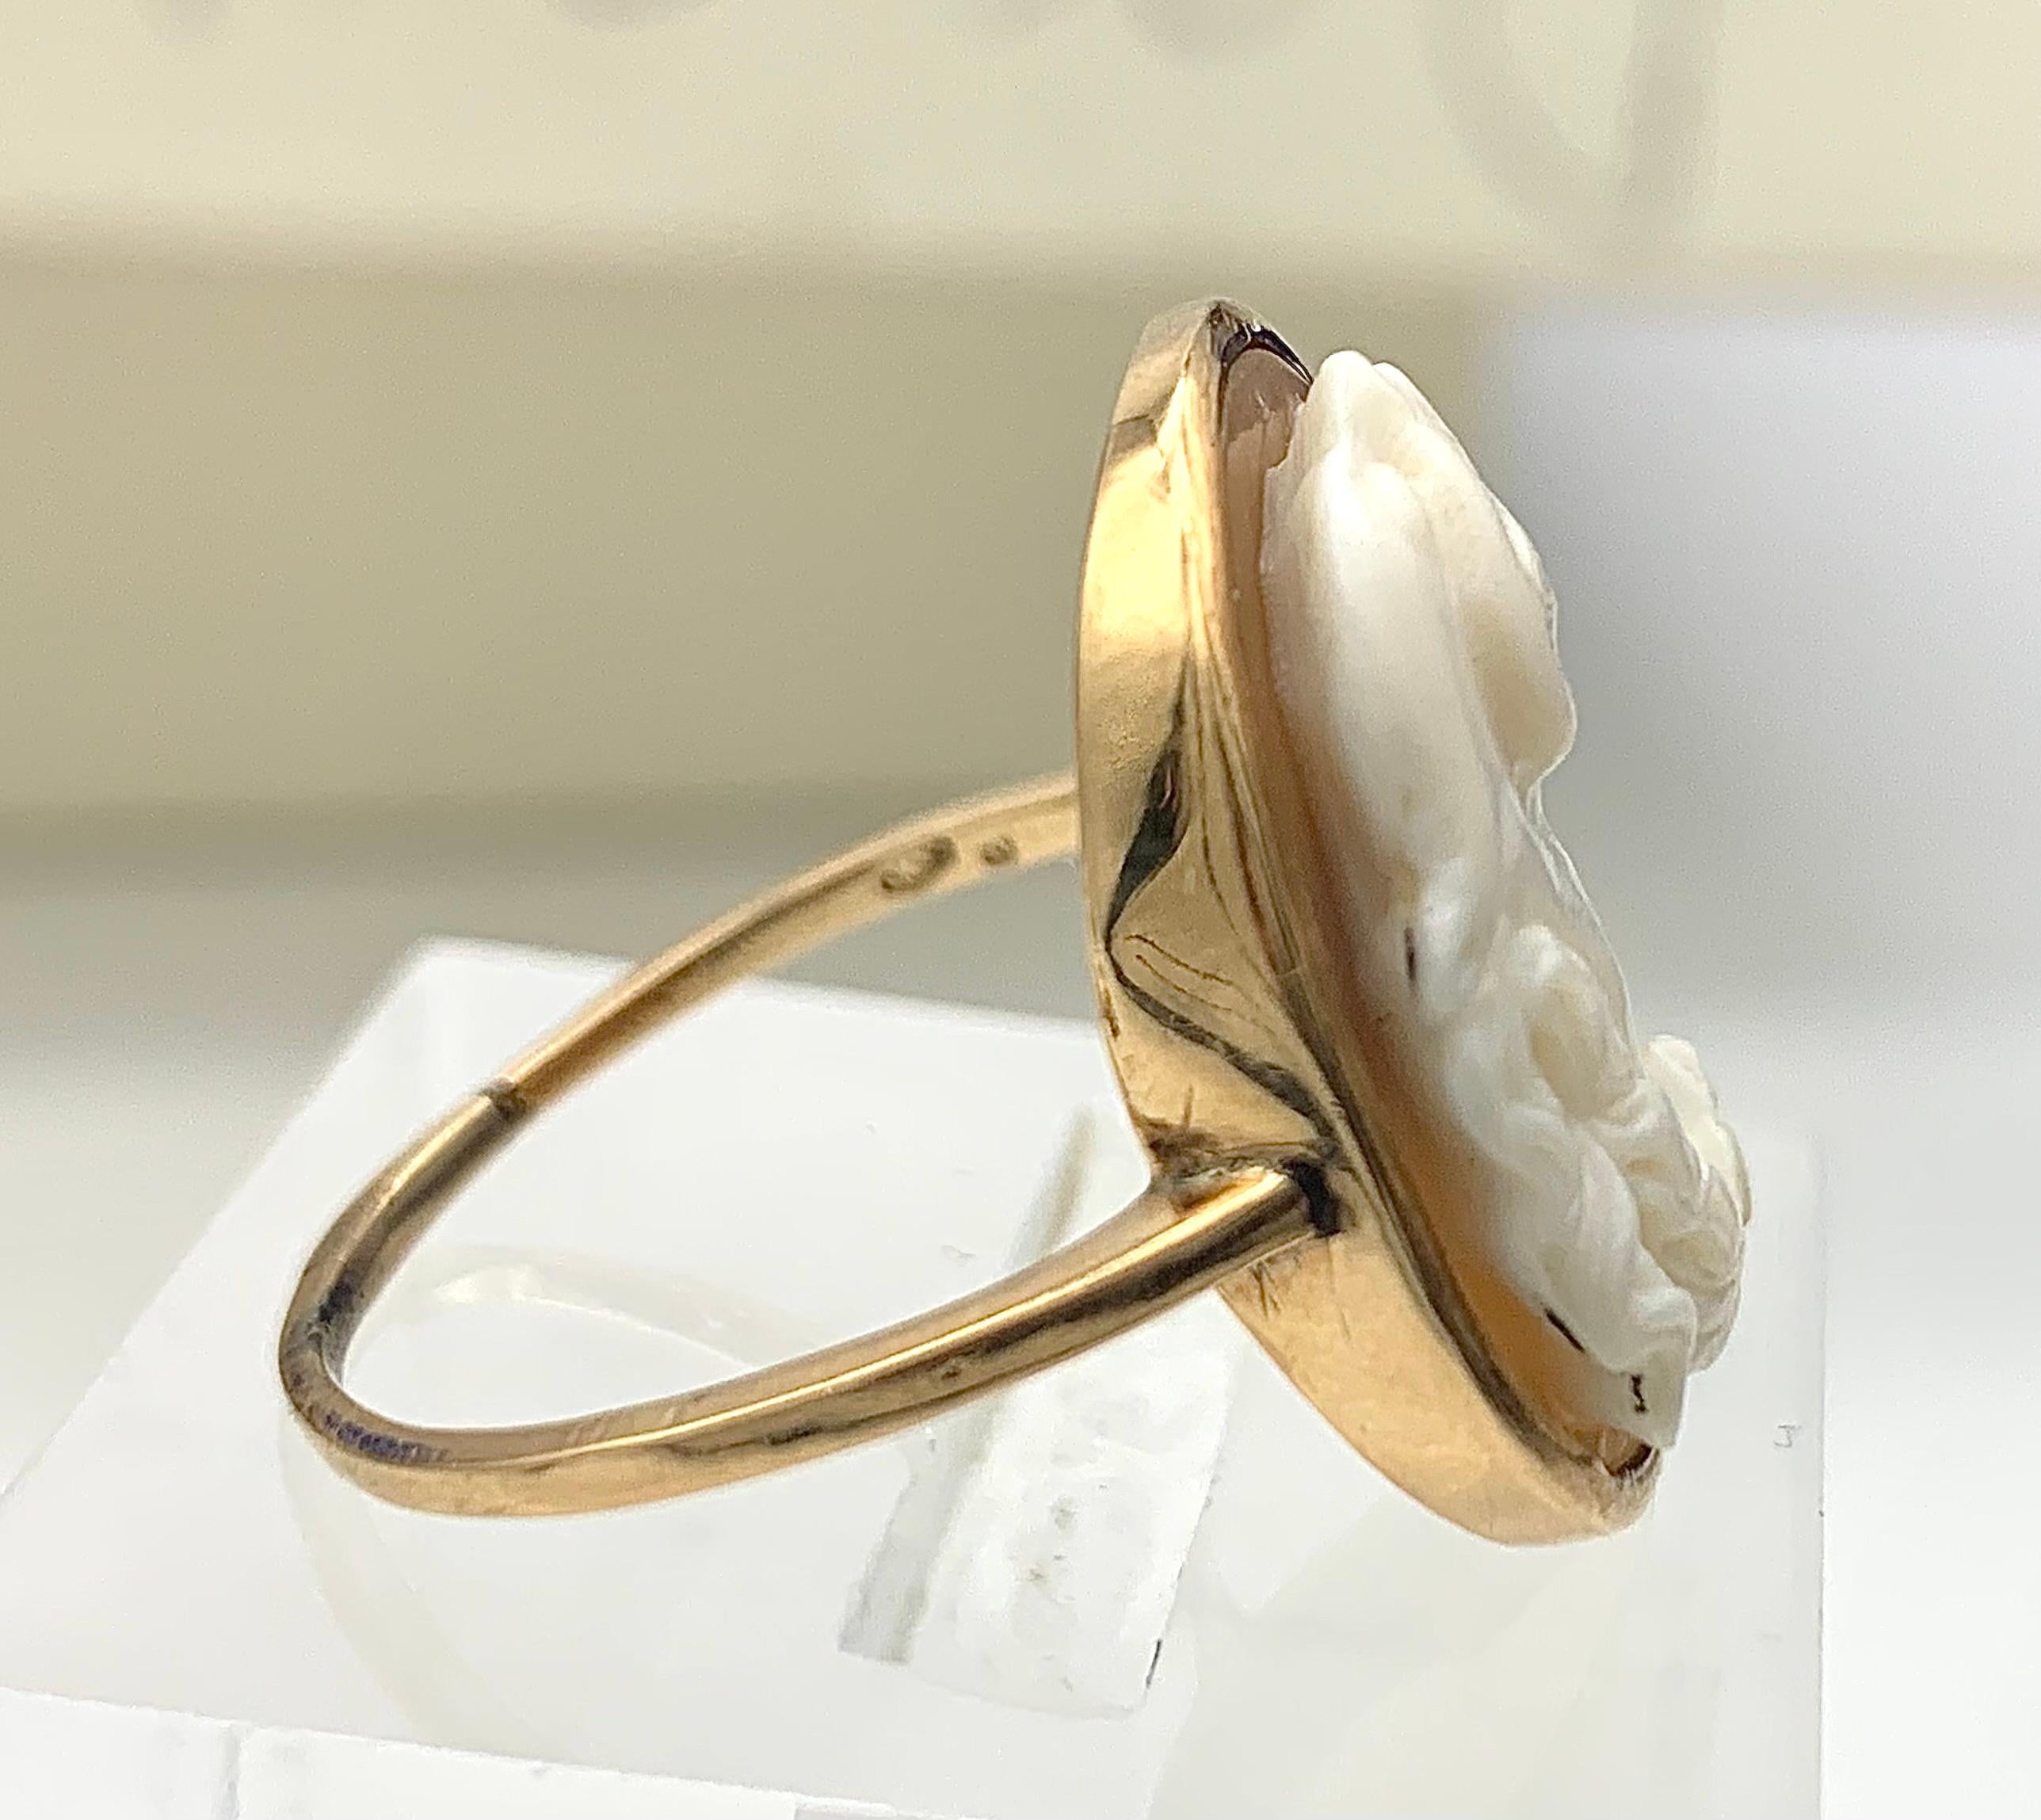 This ring was made in 1870-1880 ca. The cameo is carved out of a shell and ounted in a 14 karat gold setting. The subject of the cameo is the Greek hero Hercules,  carved as a bust in profile wearing a lion skin. 
Hercules or Heracles, his geek